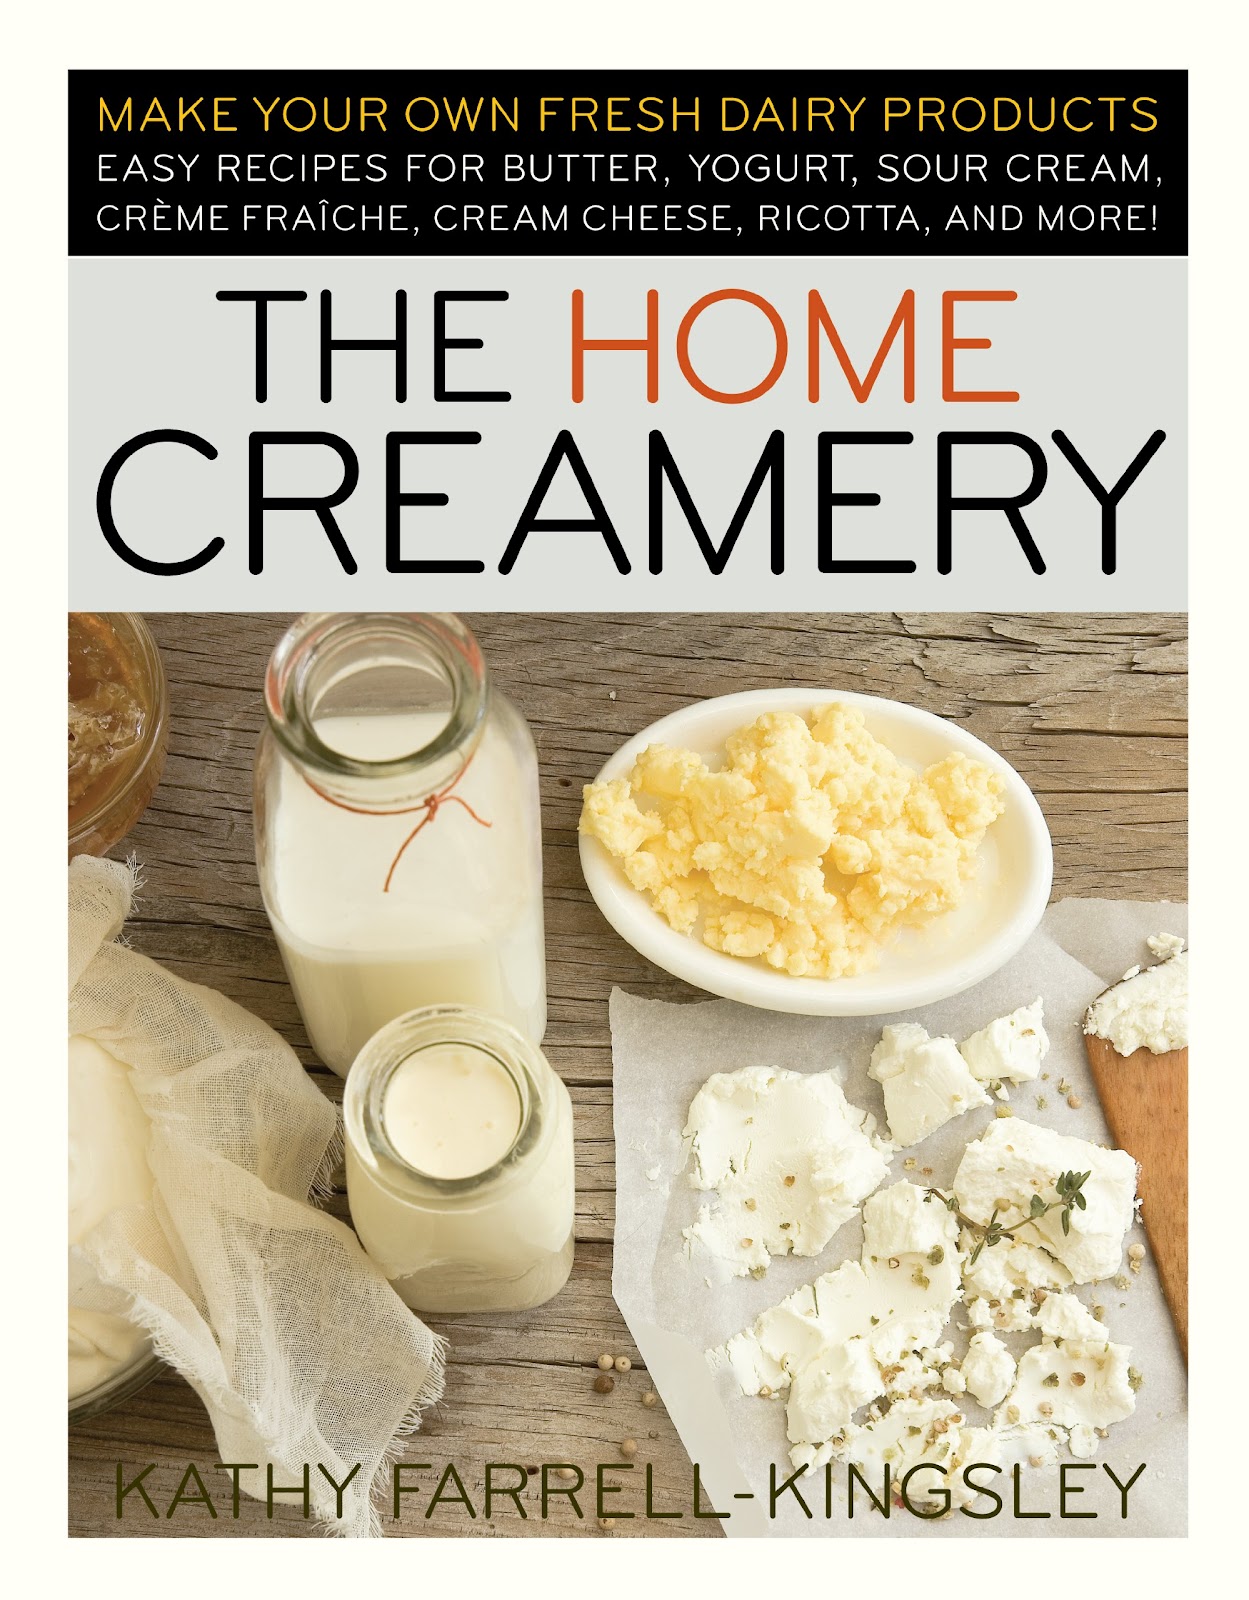 Popular Books - The Home Creamery: Make Your Own Fresh Dairy Products; Easy Recipes for Butter, Yogurt, Sour Cream, Creme Fraiche, Cream Cheese, Ricotta, and More!